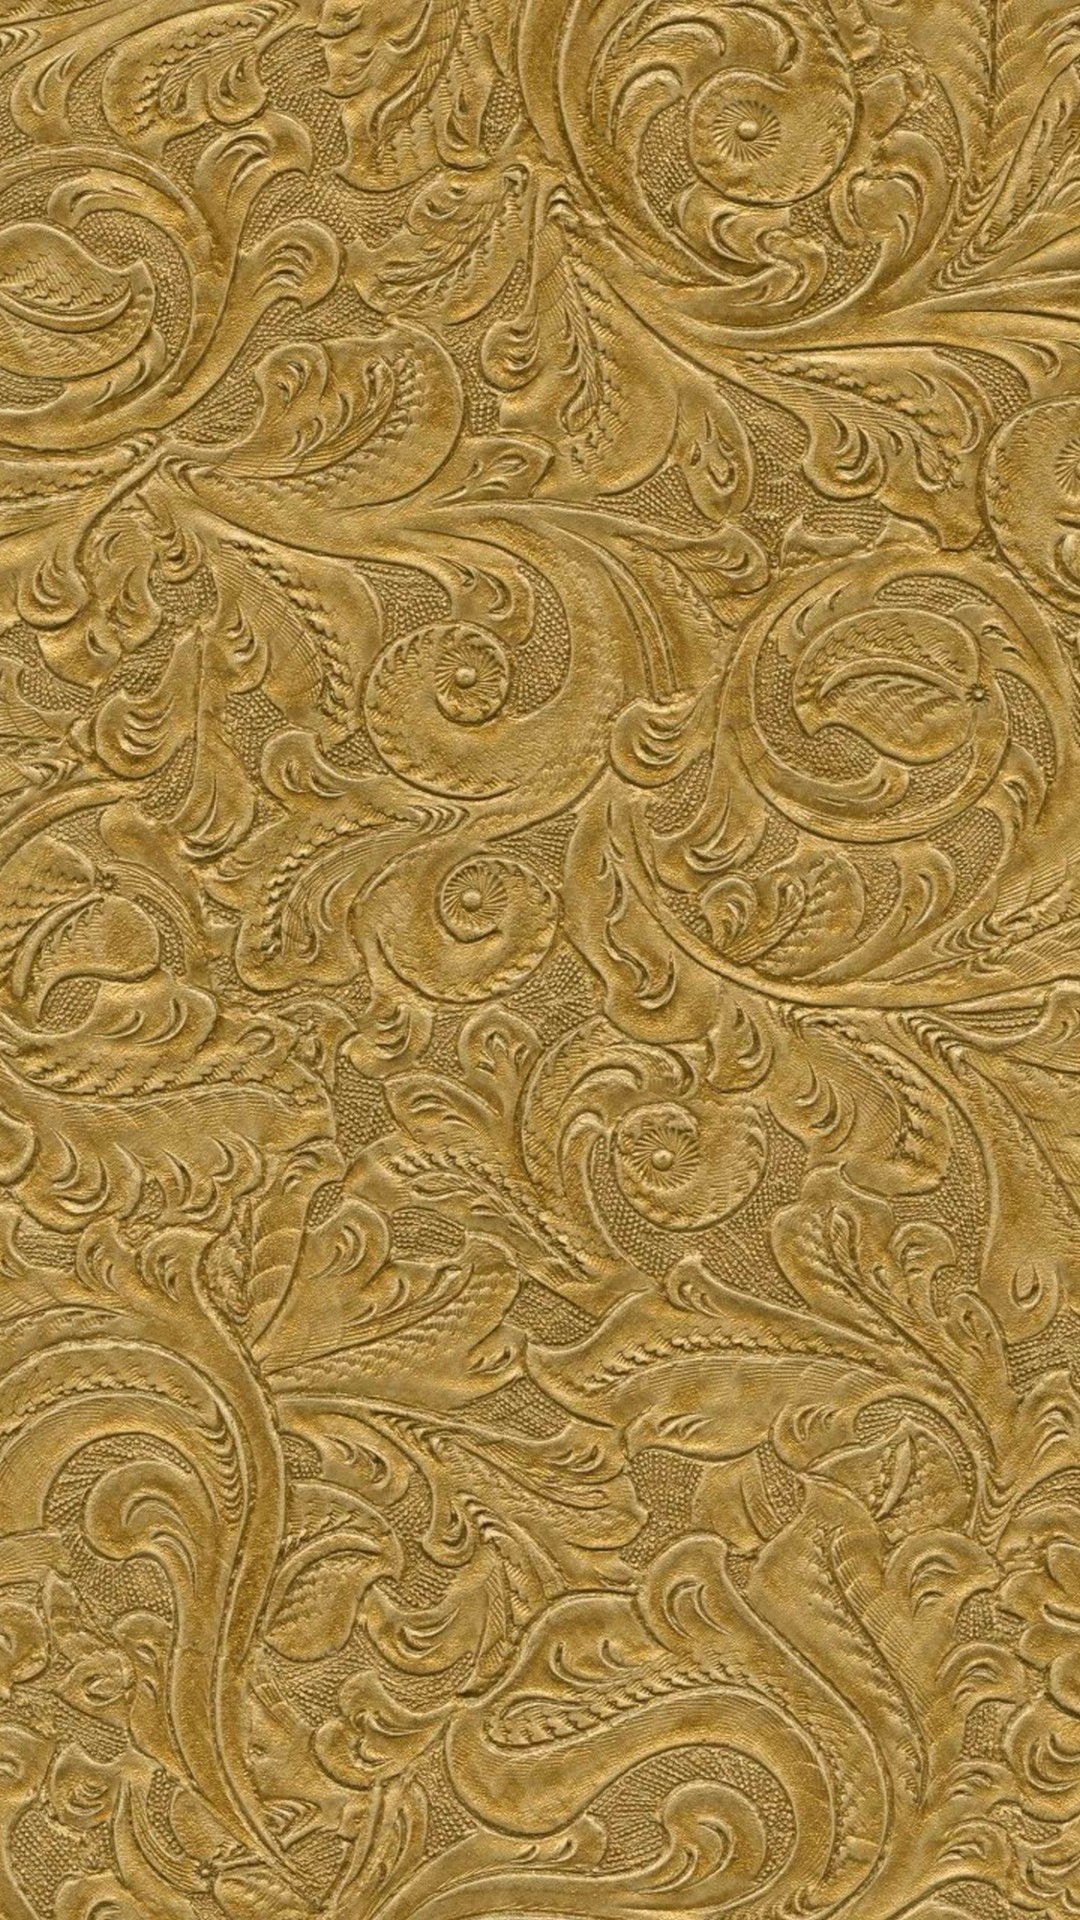 Gold Designs Android Wallpaper with HD resolution 1080x1920